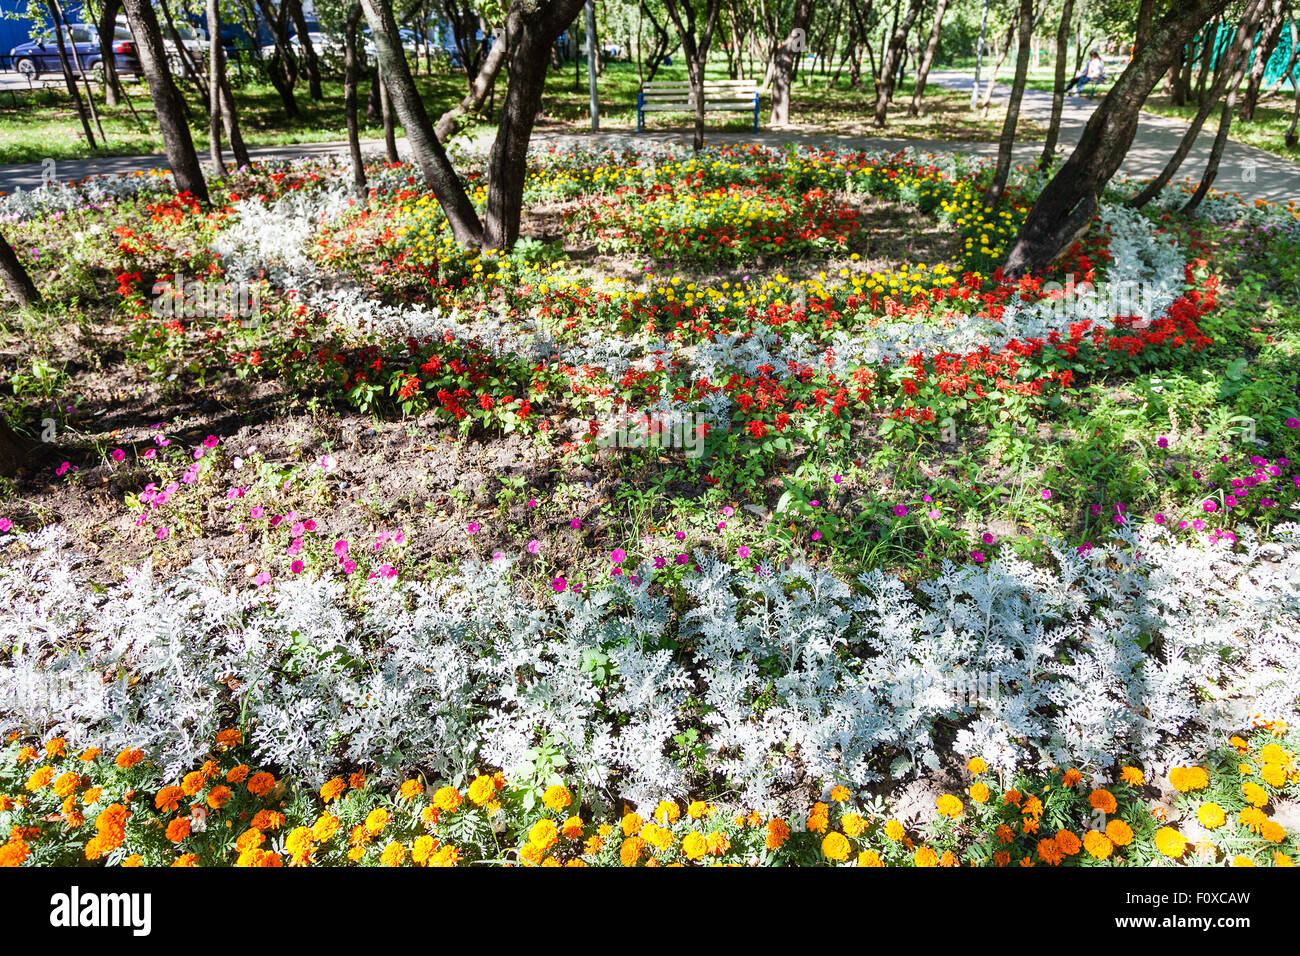 round flowerbed with dianthus flowers and jacobaea (cineraria maritima) plant in urban garden Stock Photo